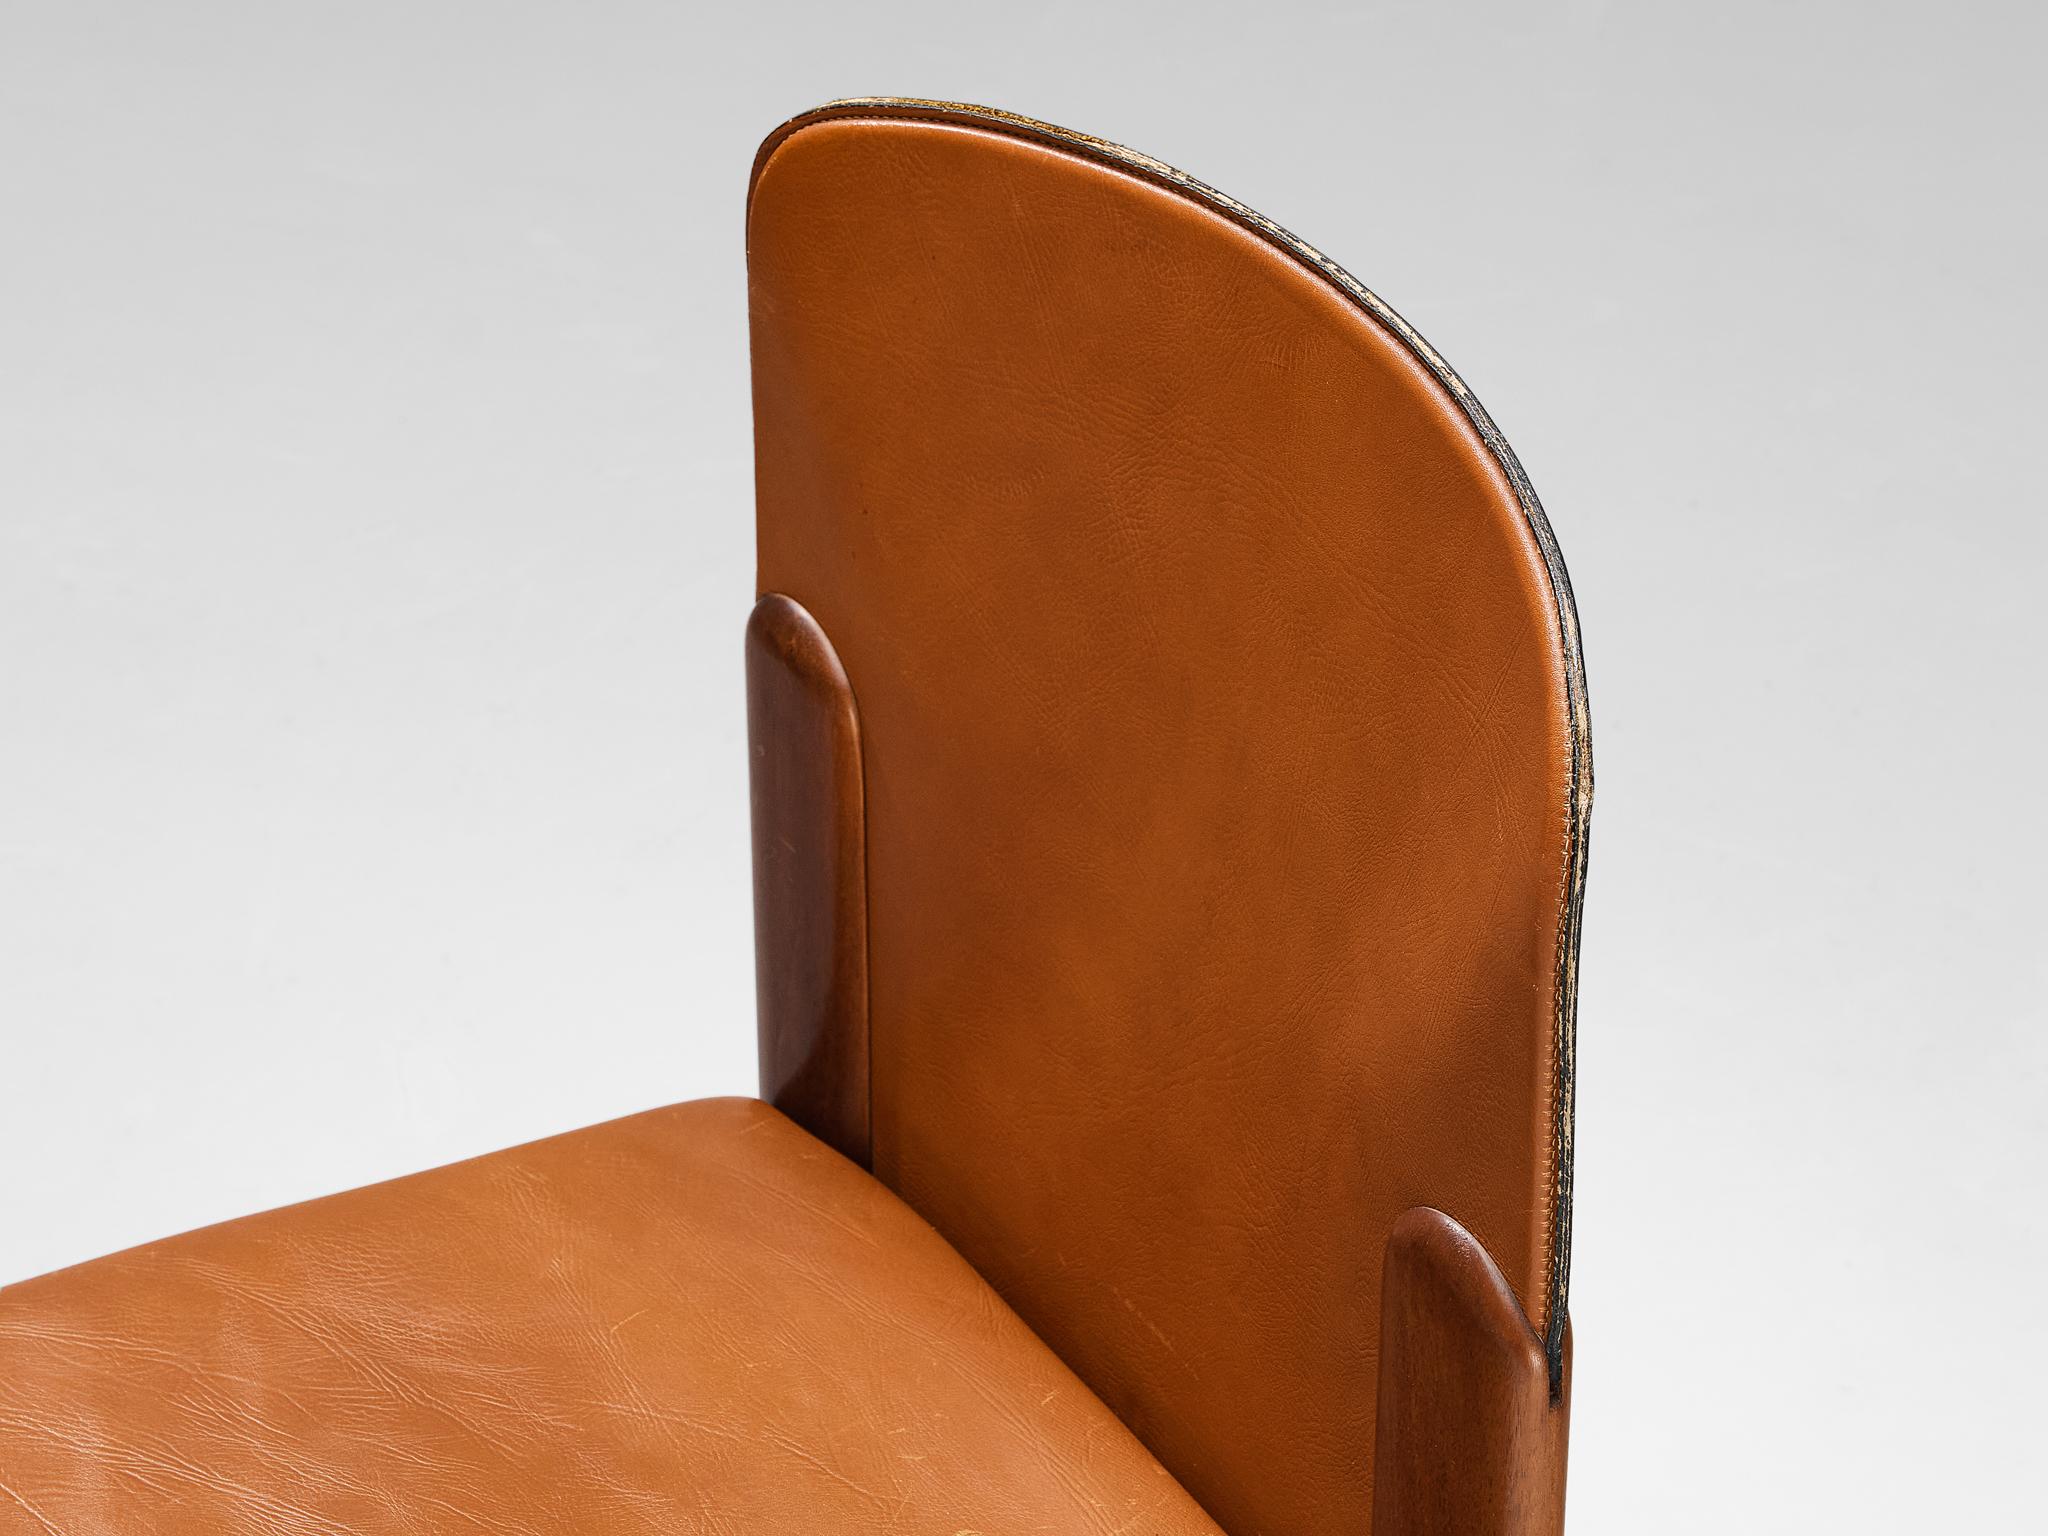 Silvio Coppola for Bernini Pair of Dining Chairs in Leather and Walnut  1